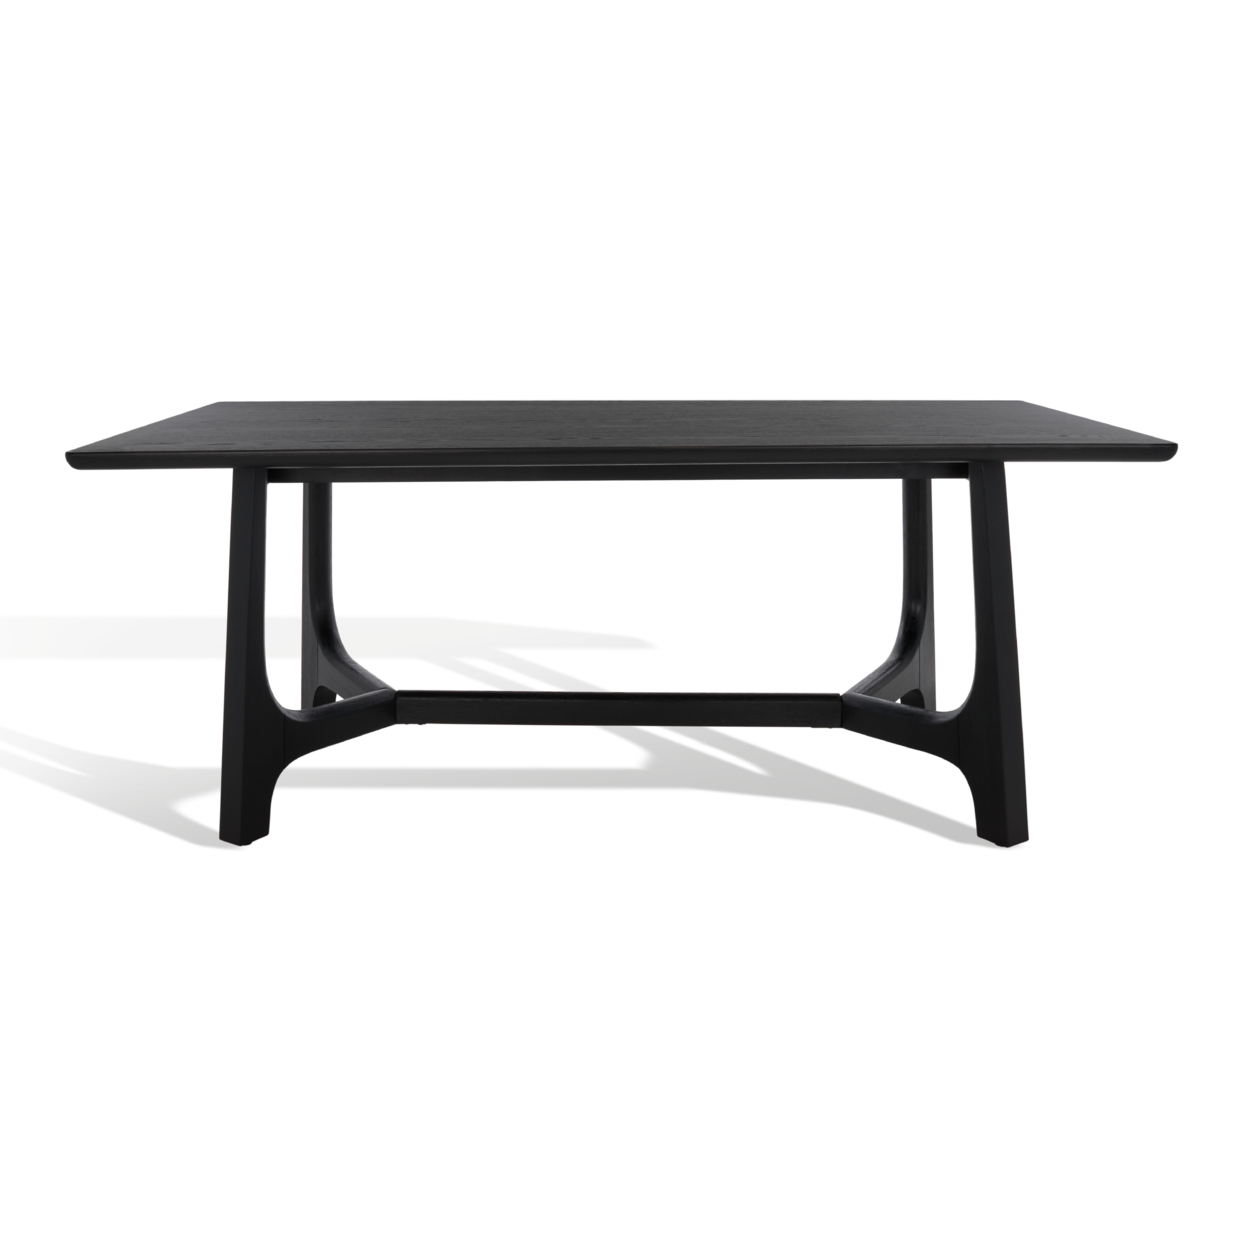 SAFAVIEH COUTURE Adelee Wood Rectangle Dn Table Black